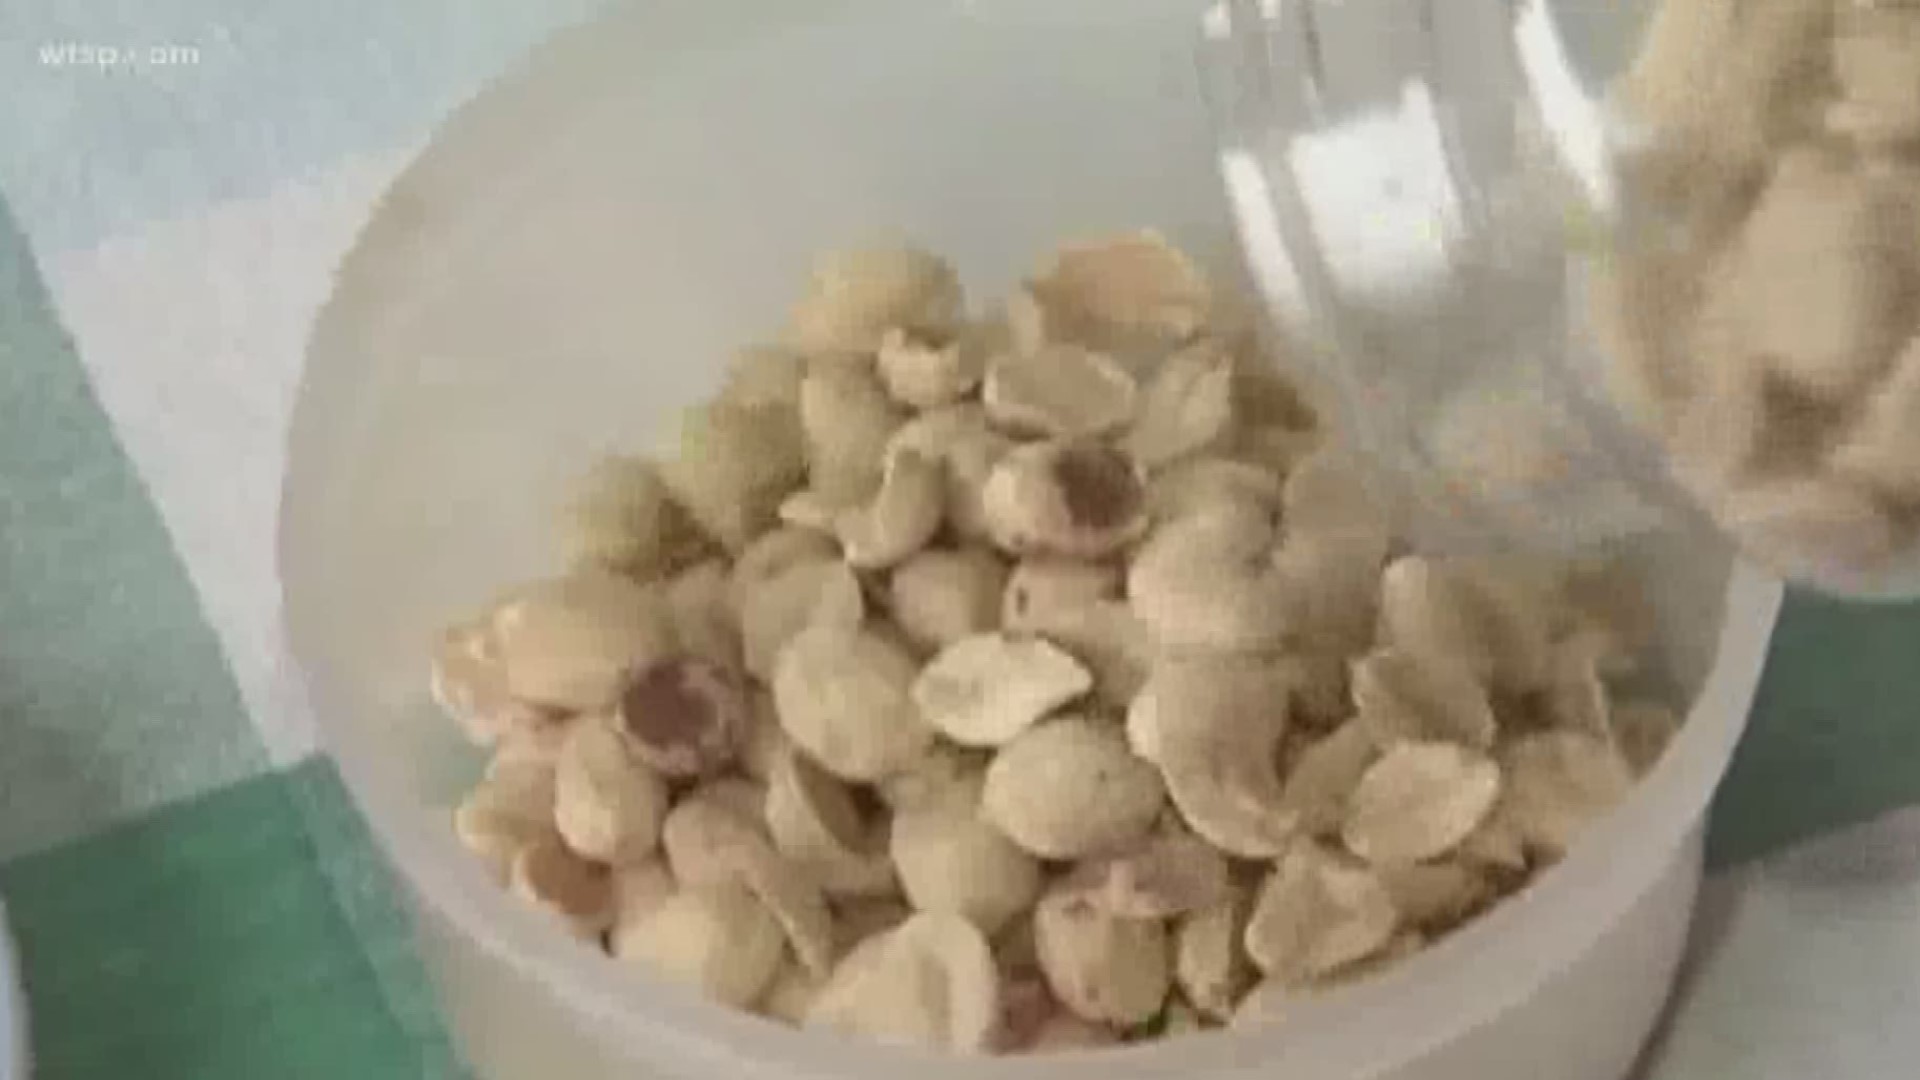 A panel of experts is pushing the FDA to approve the first-ever treatment for children with peanut allergies. The drug is not a cure, rather, it's a daily medication designed to build up a child's tolerance so an accidental exposure doesn't turn into a life-threatening reaction.